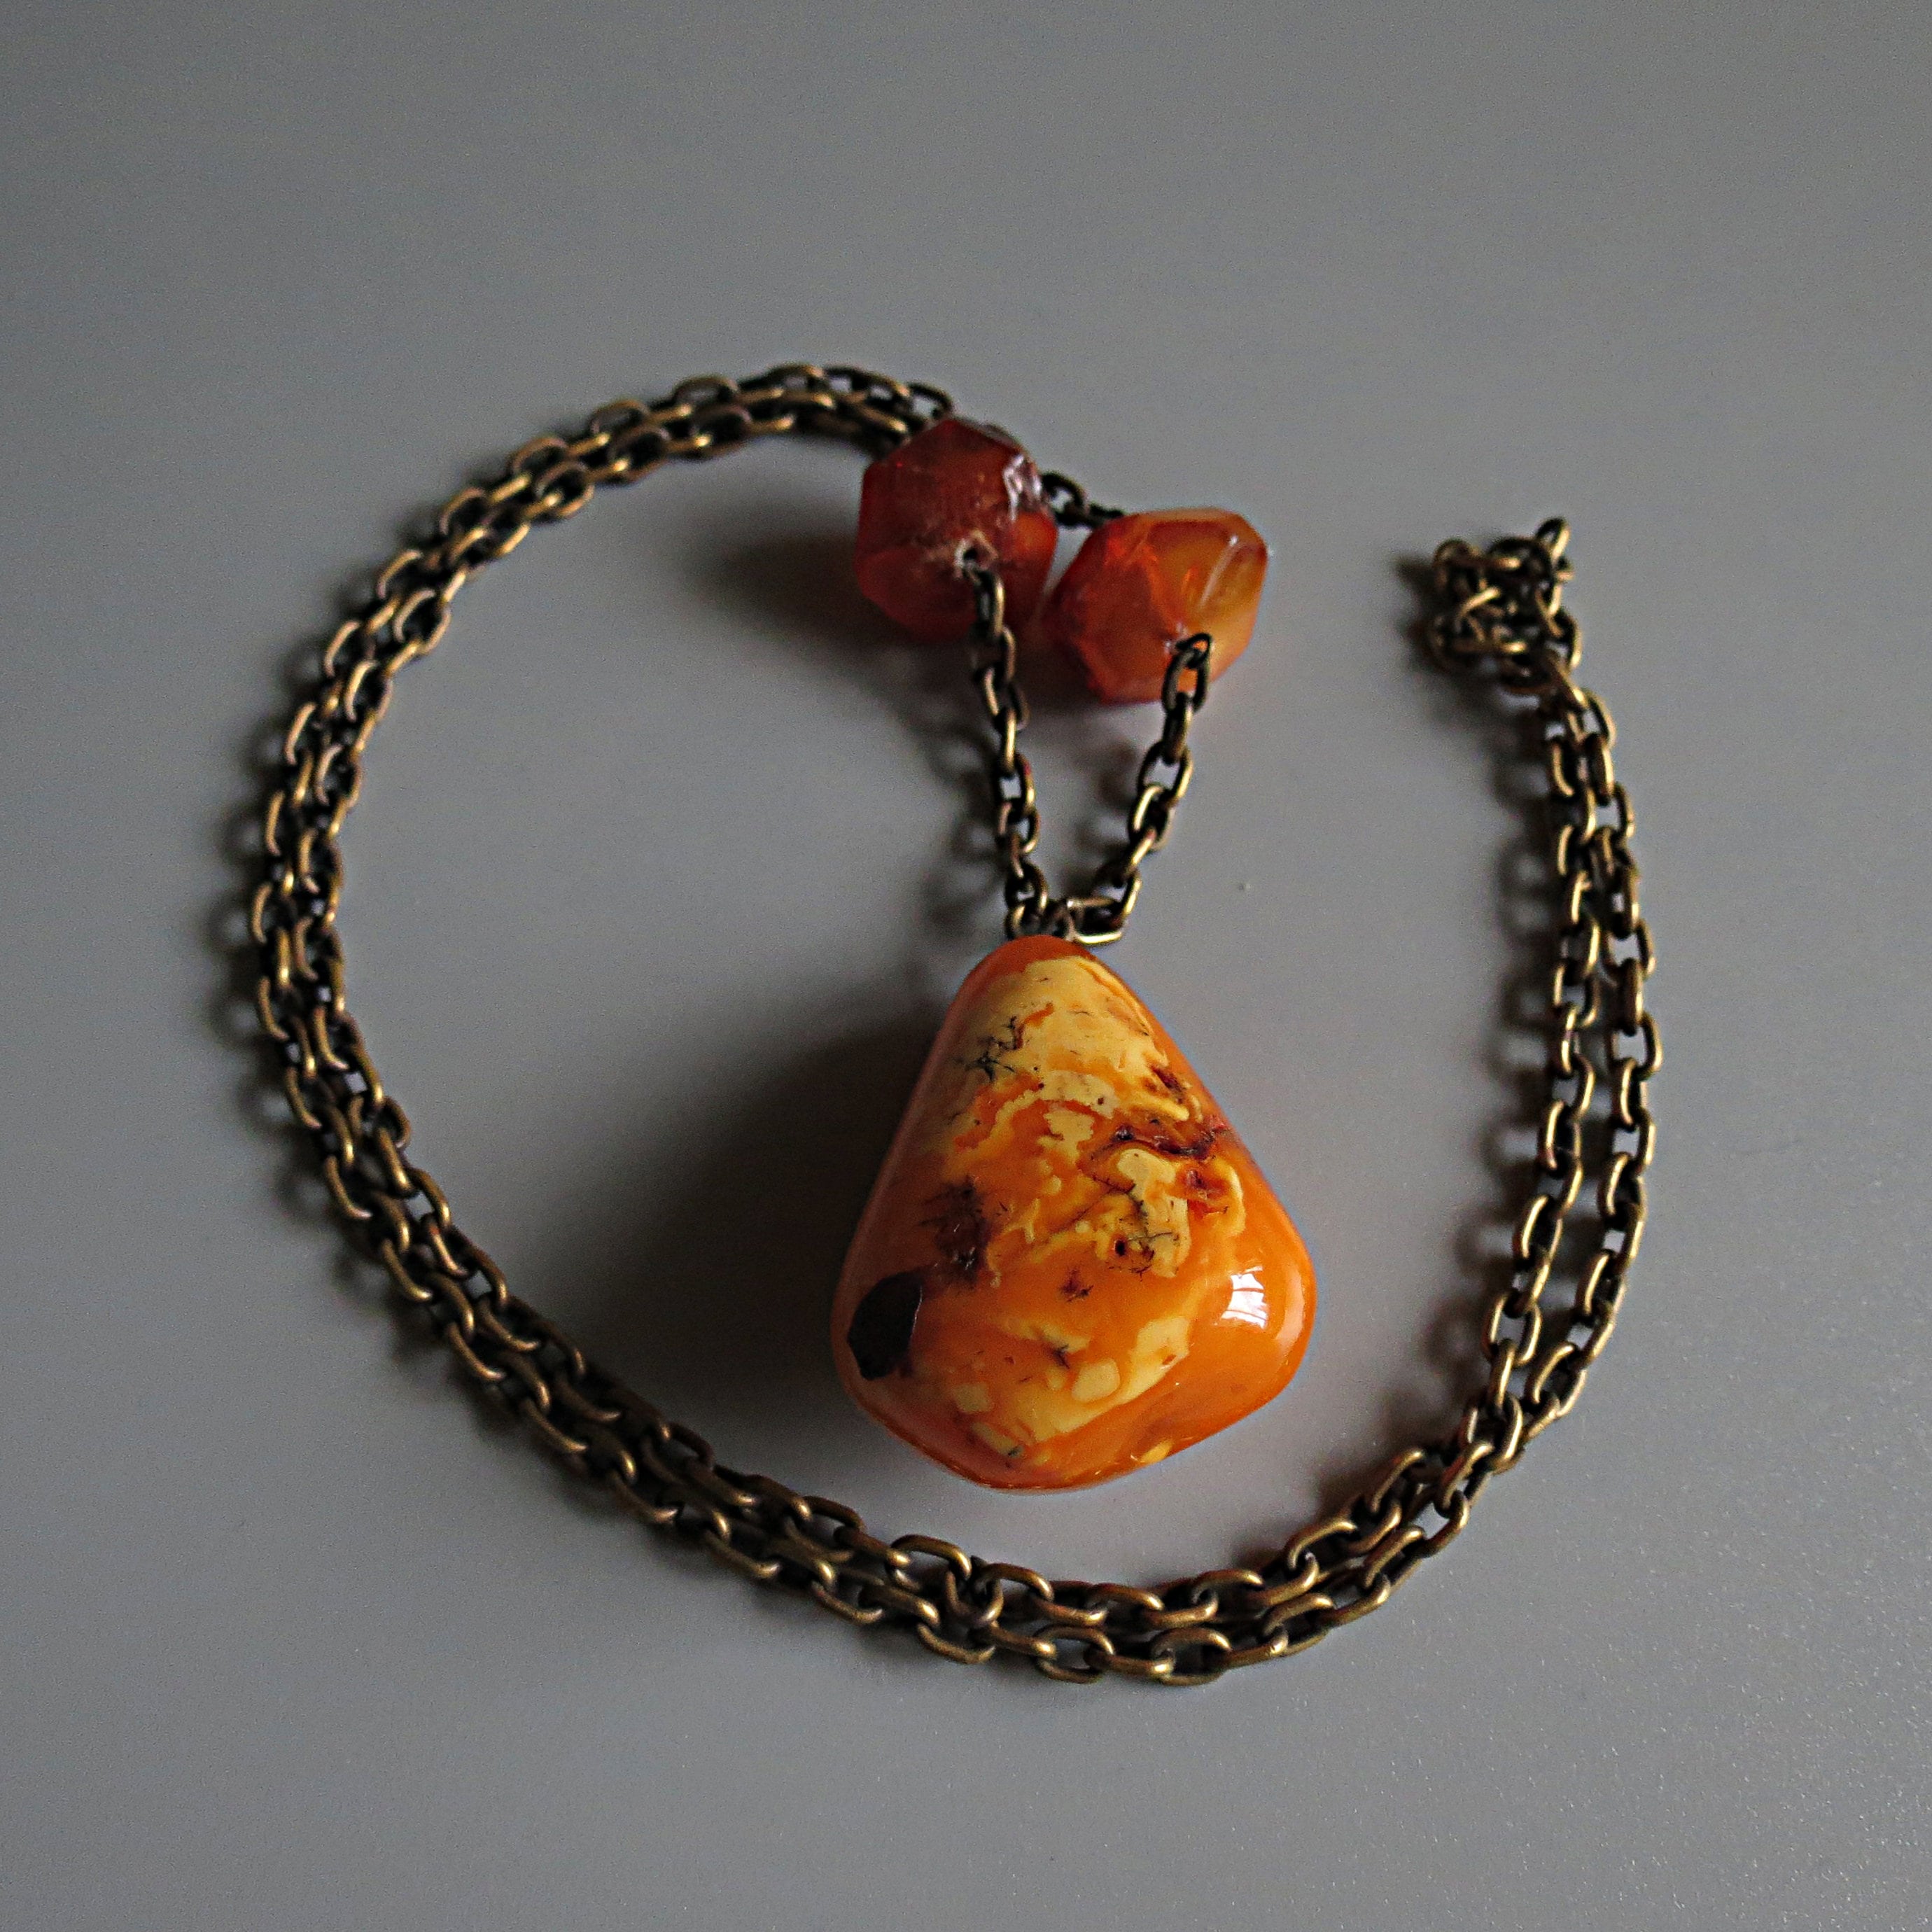 Large and Extremely Rare Vintage Amber Necklace For Sale at 1stDibs | vintage  amber jewelry, most valuable rare vintage jewelry, amber jewelry for sale